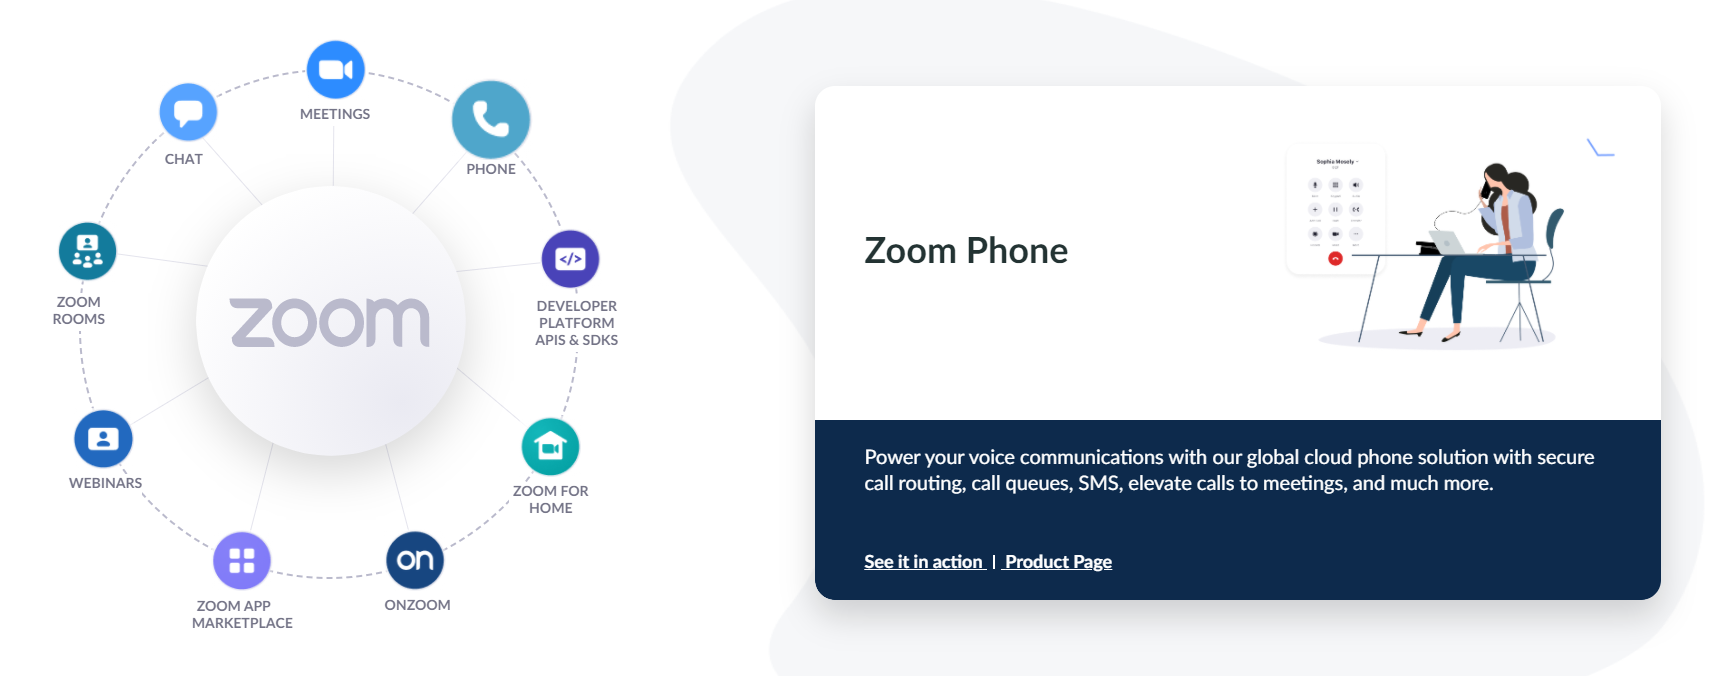 Zoom as Work from home tools